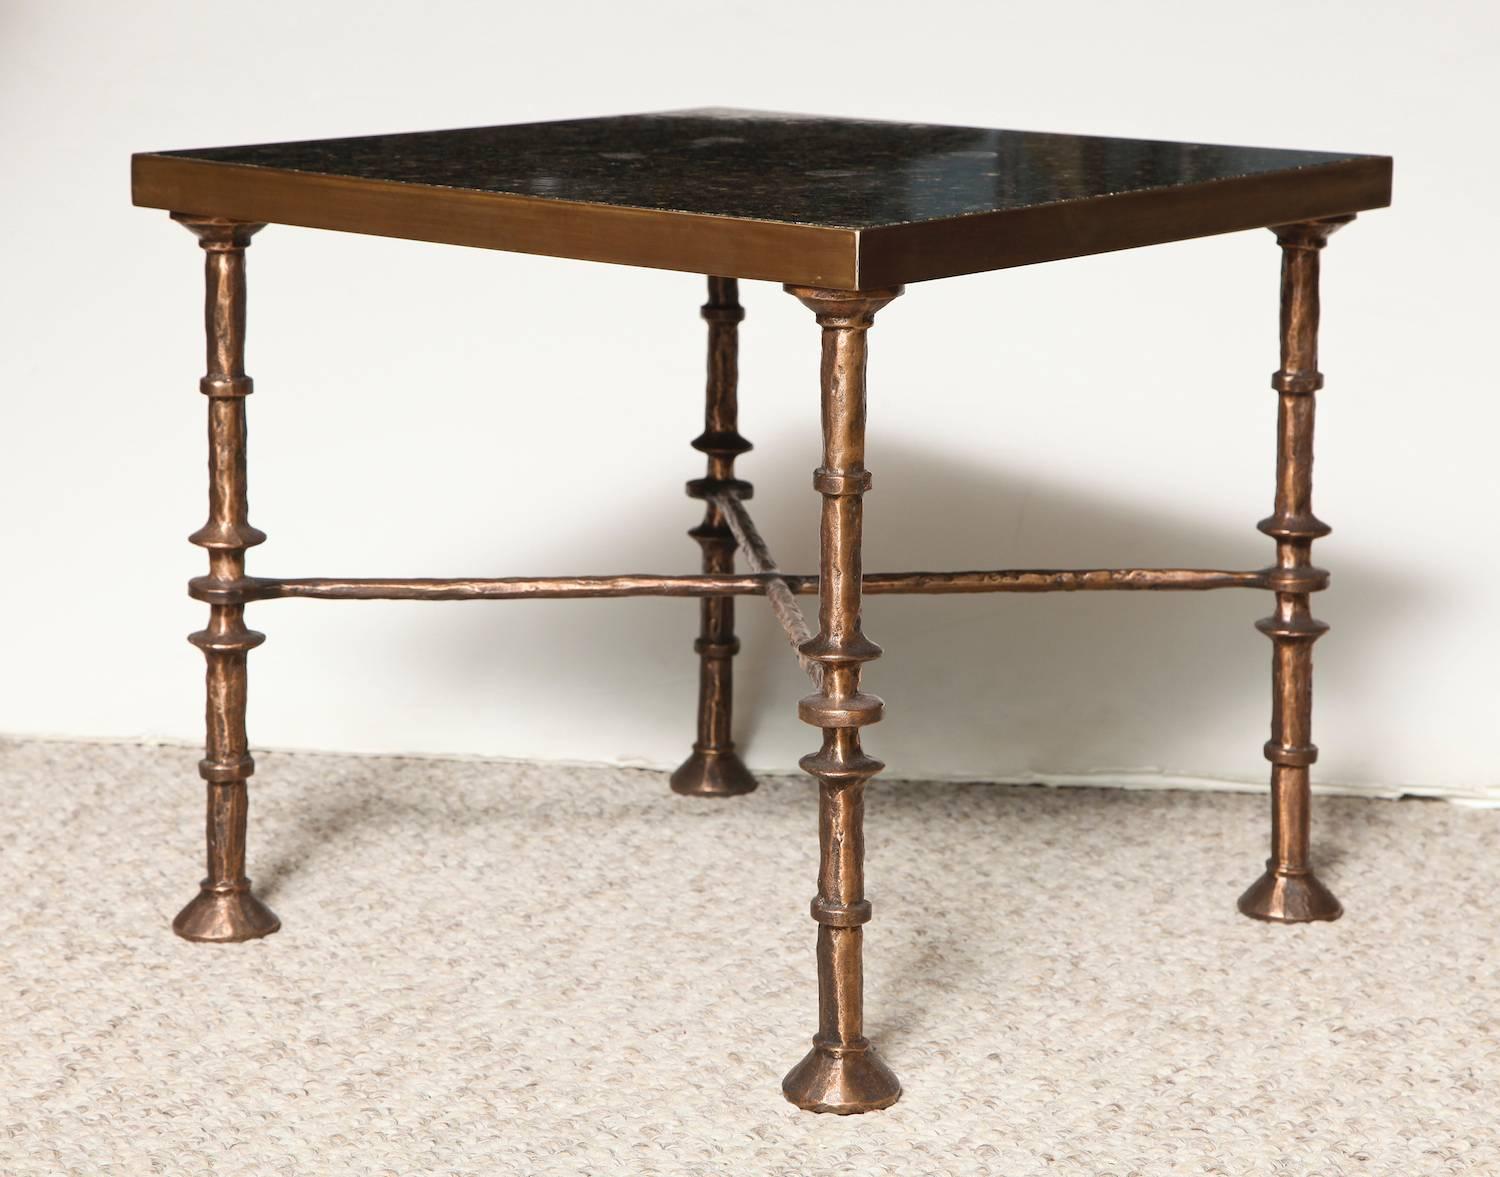 Beautiful low drinks tables of bronze with stone tops. Hand-forged bronze bases, hammered texture with custom patina. These tables are priced per table, are made per order in France and require a 12-15 week lead-time.